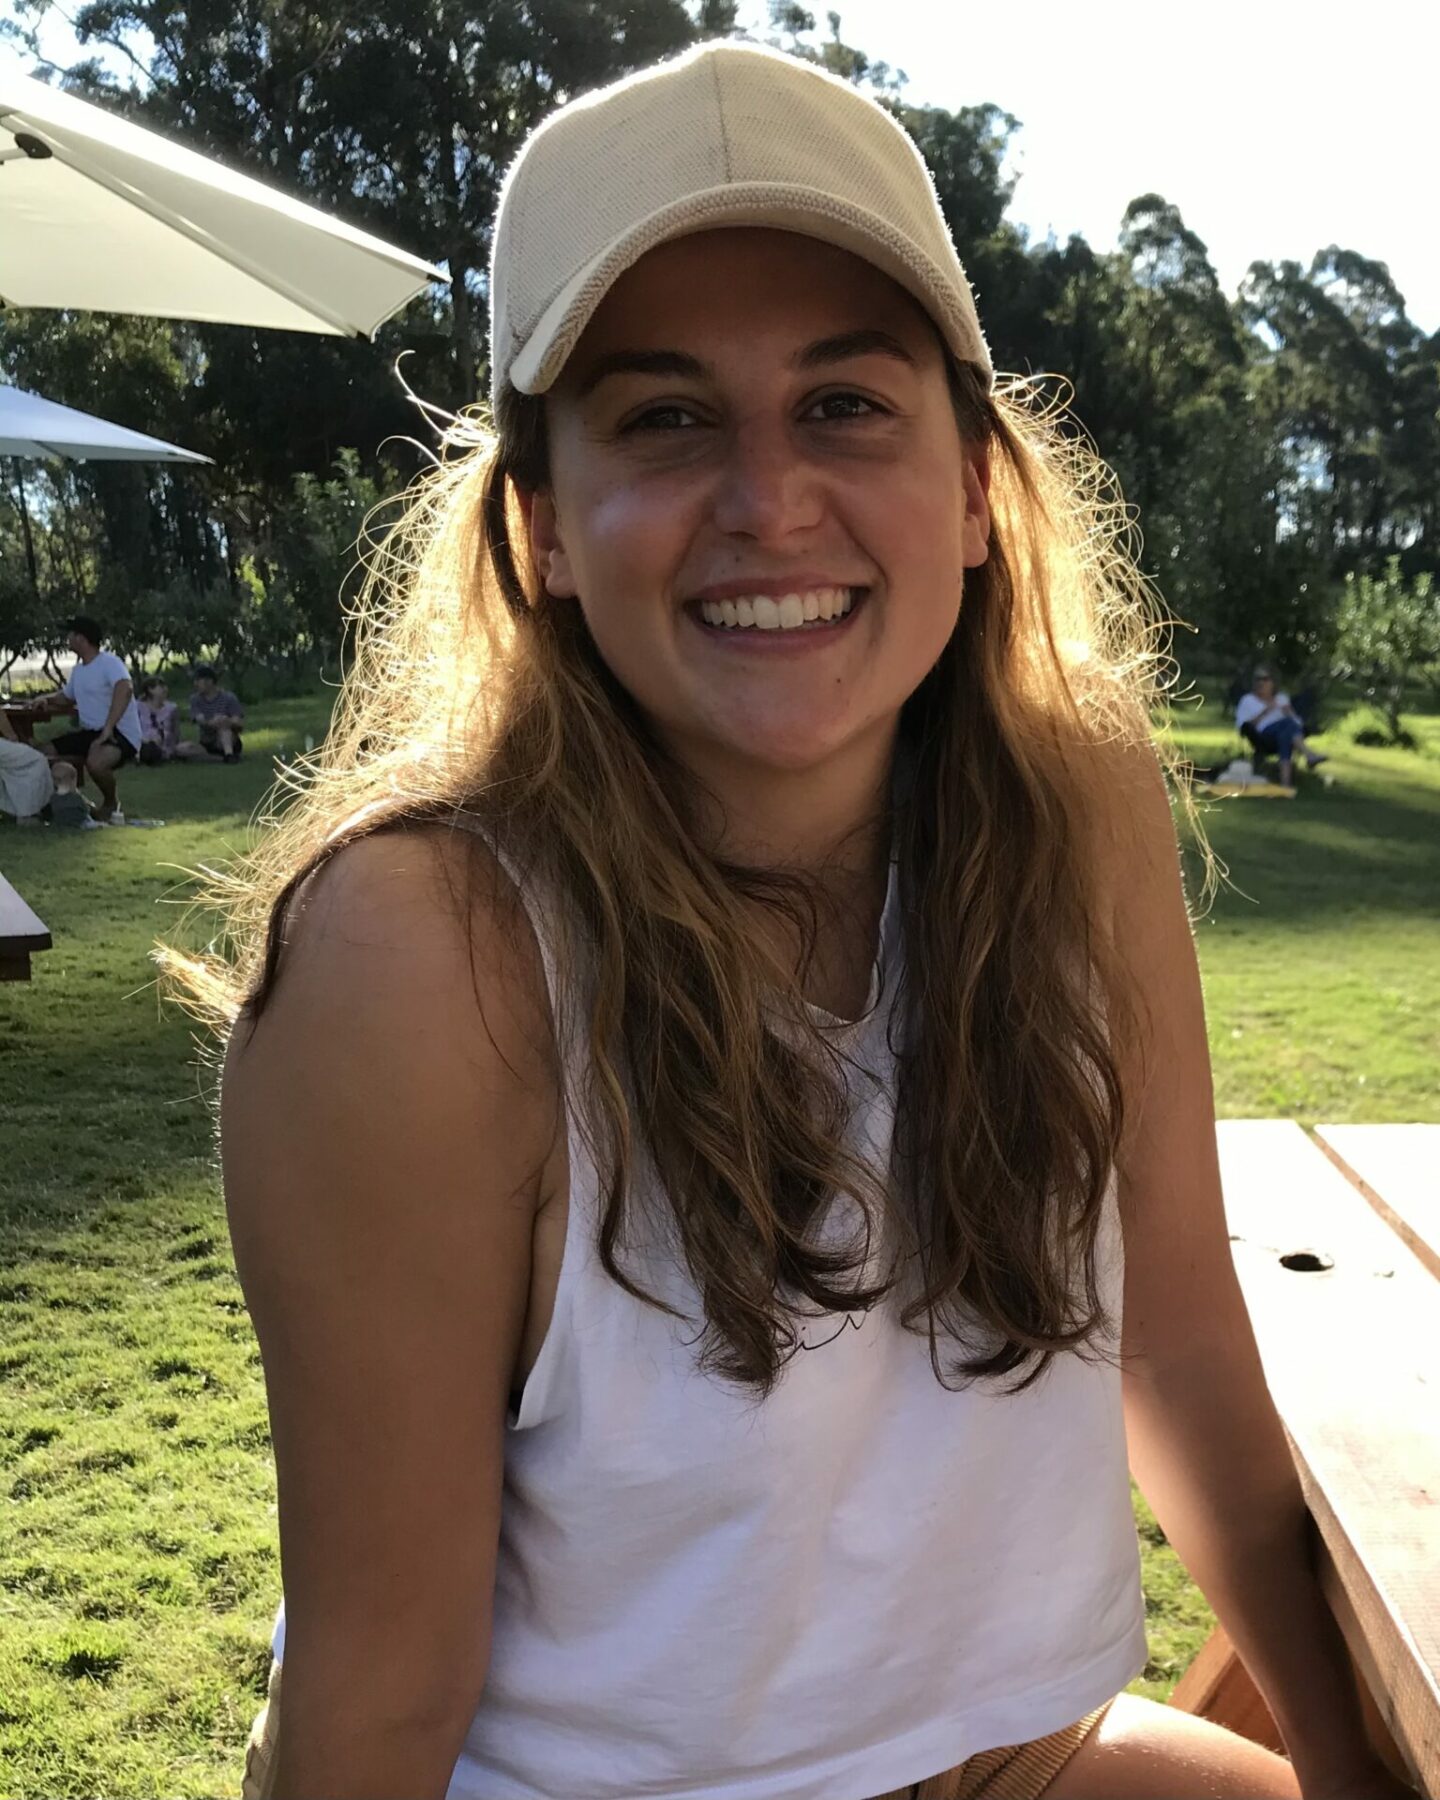 A young woman with long brown hair and a white cap smiles at the camera, sitting at a picnic table